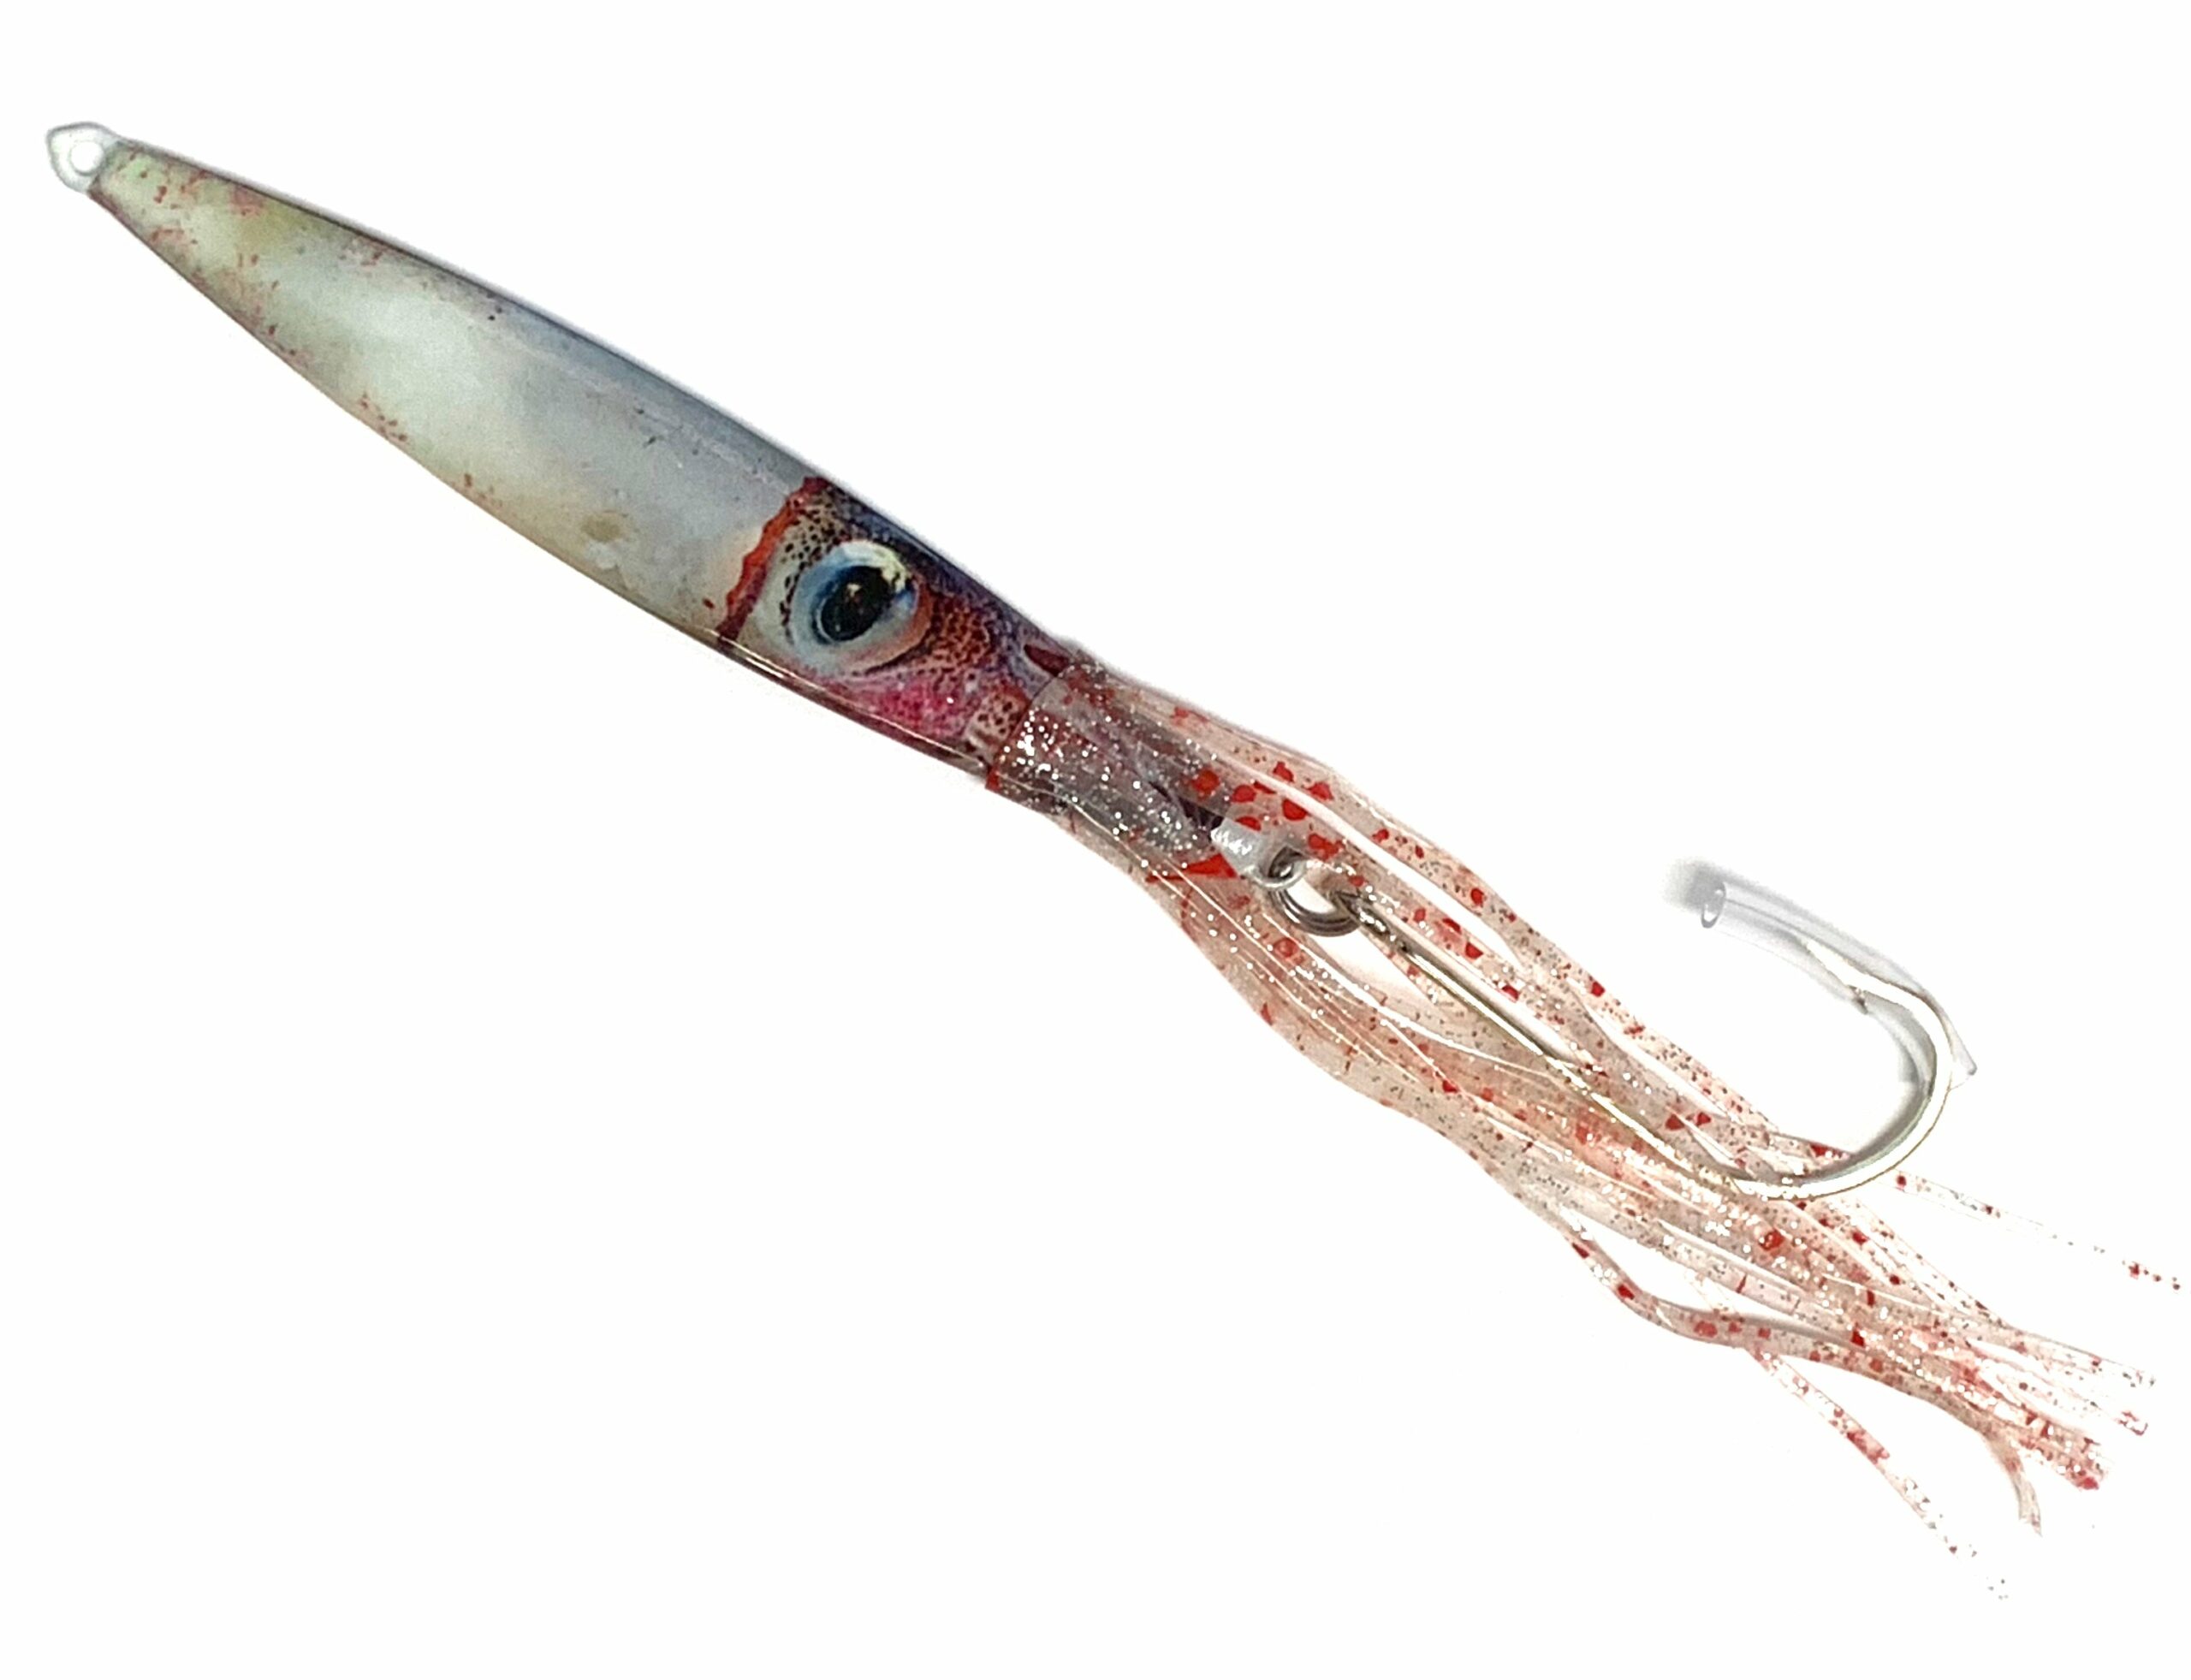 https://wonews.com/wp-content/uploads/2023/03/Lingcod_Jigs_Livingsquid_Red_Spawn_Glow-scaled.jpg